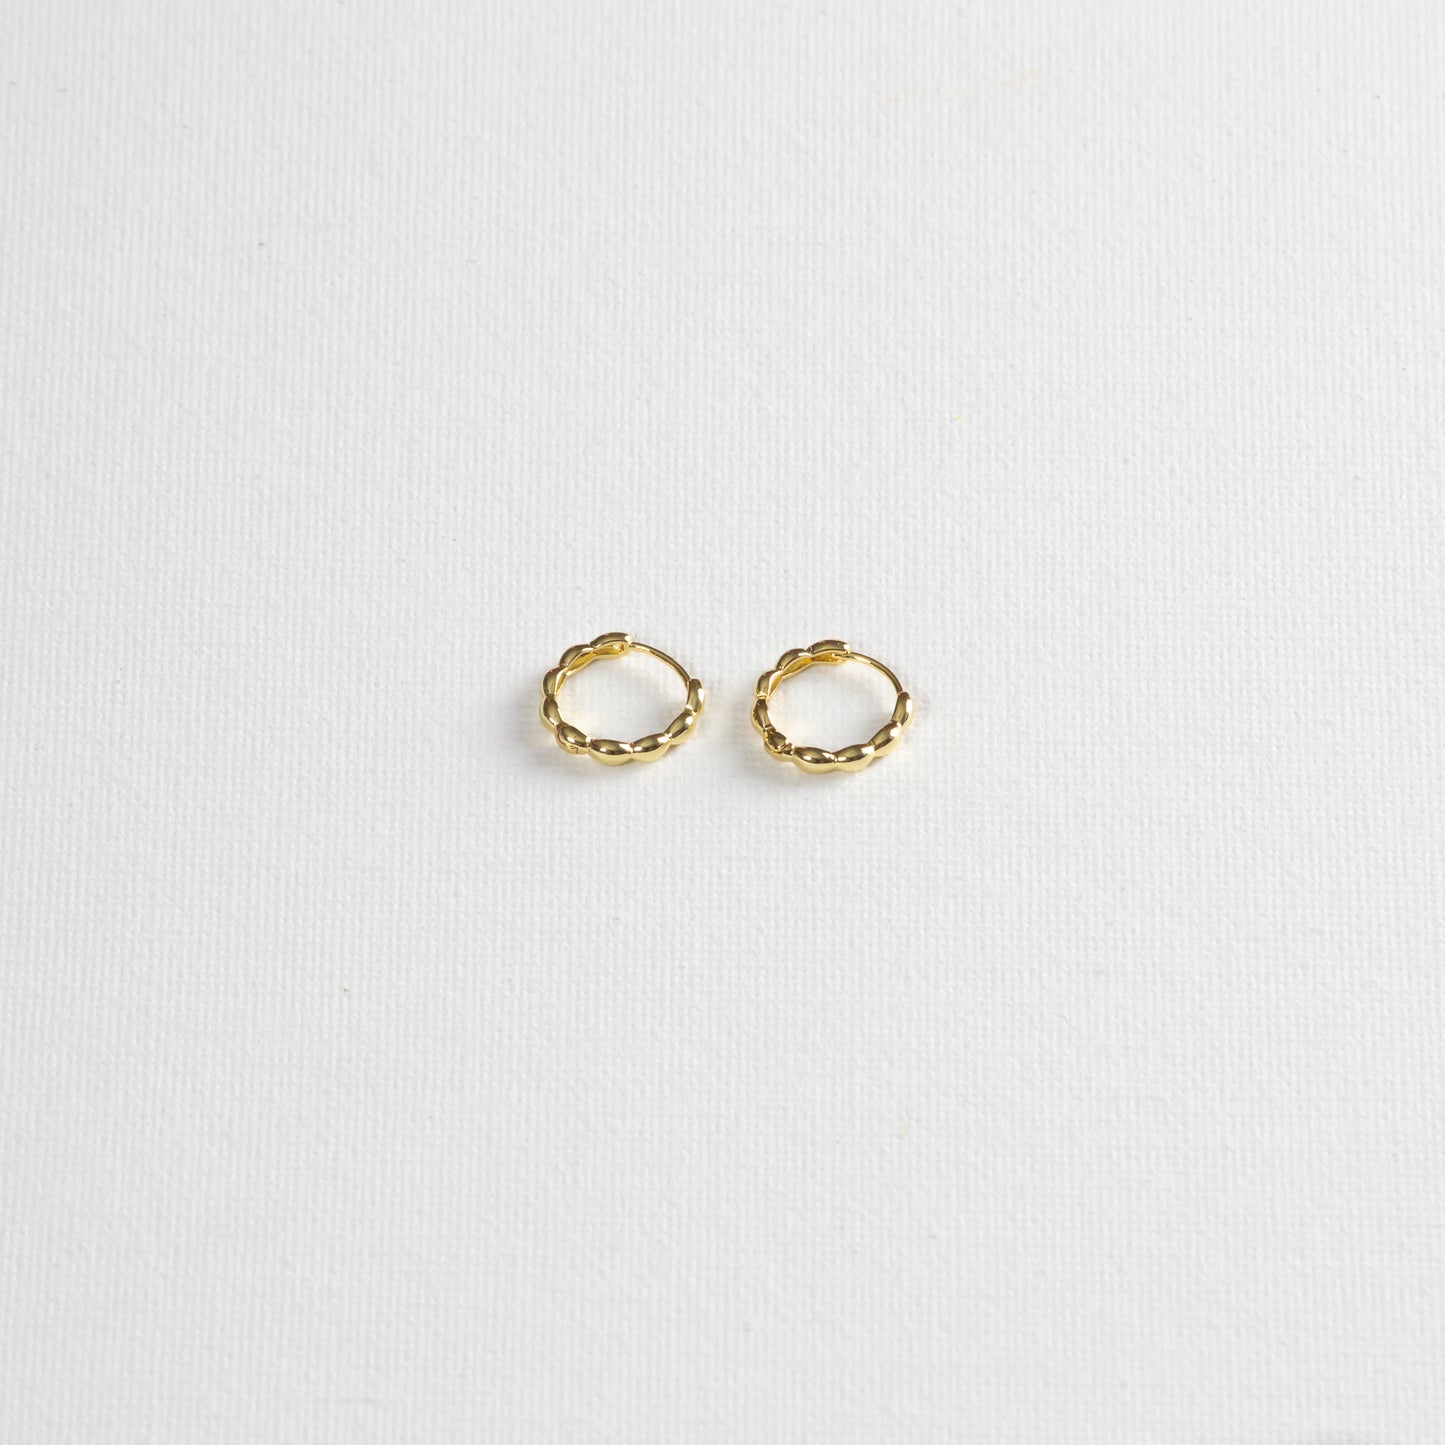 Oryza hoops, gold hoops with rounded textures, photographed on a white background. The photo is taken at a slight angle from the bottom.